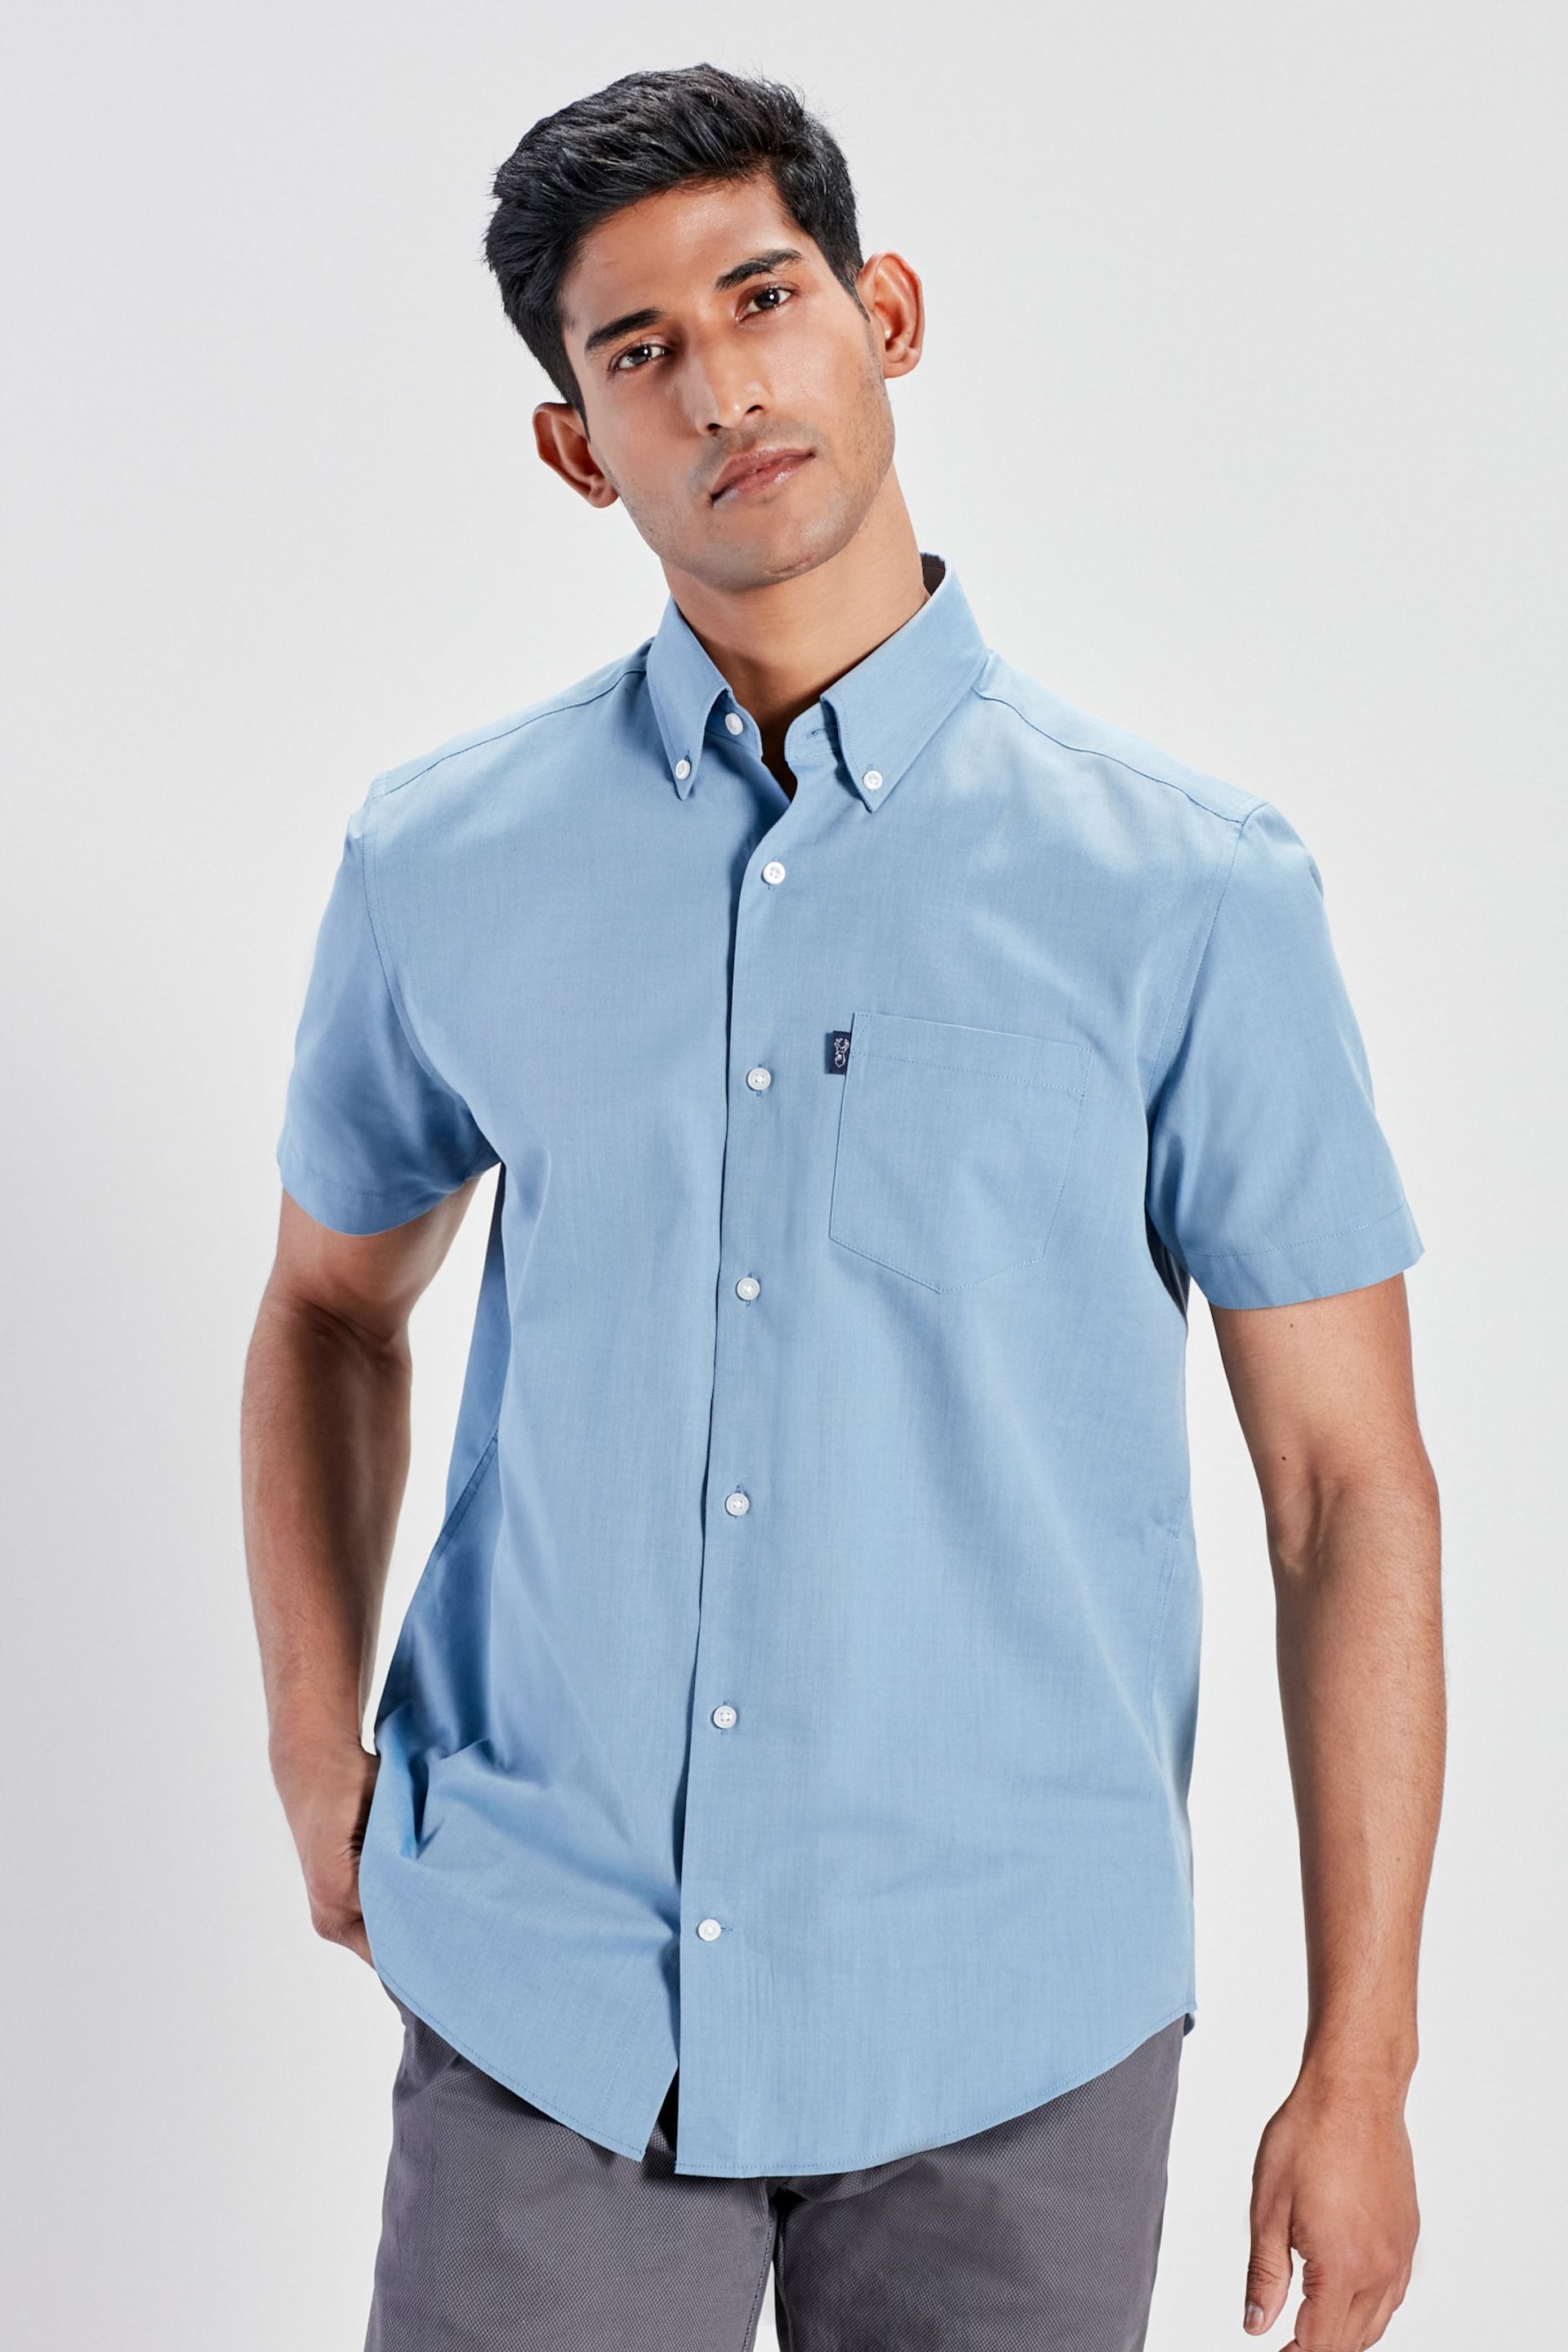 Dusky Blue Regular Fit Short Sleeve Easy Iron Button Down Oxford Shirt - Image 1 of 6